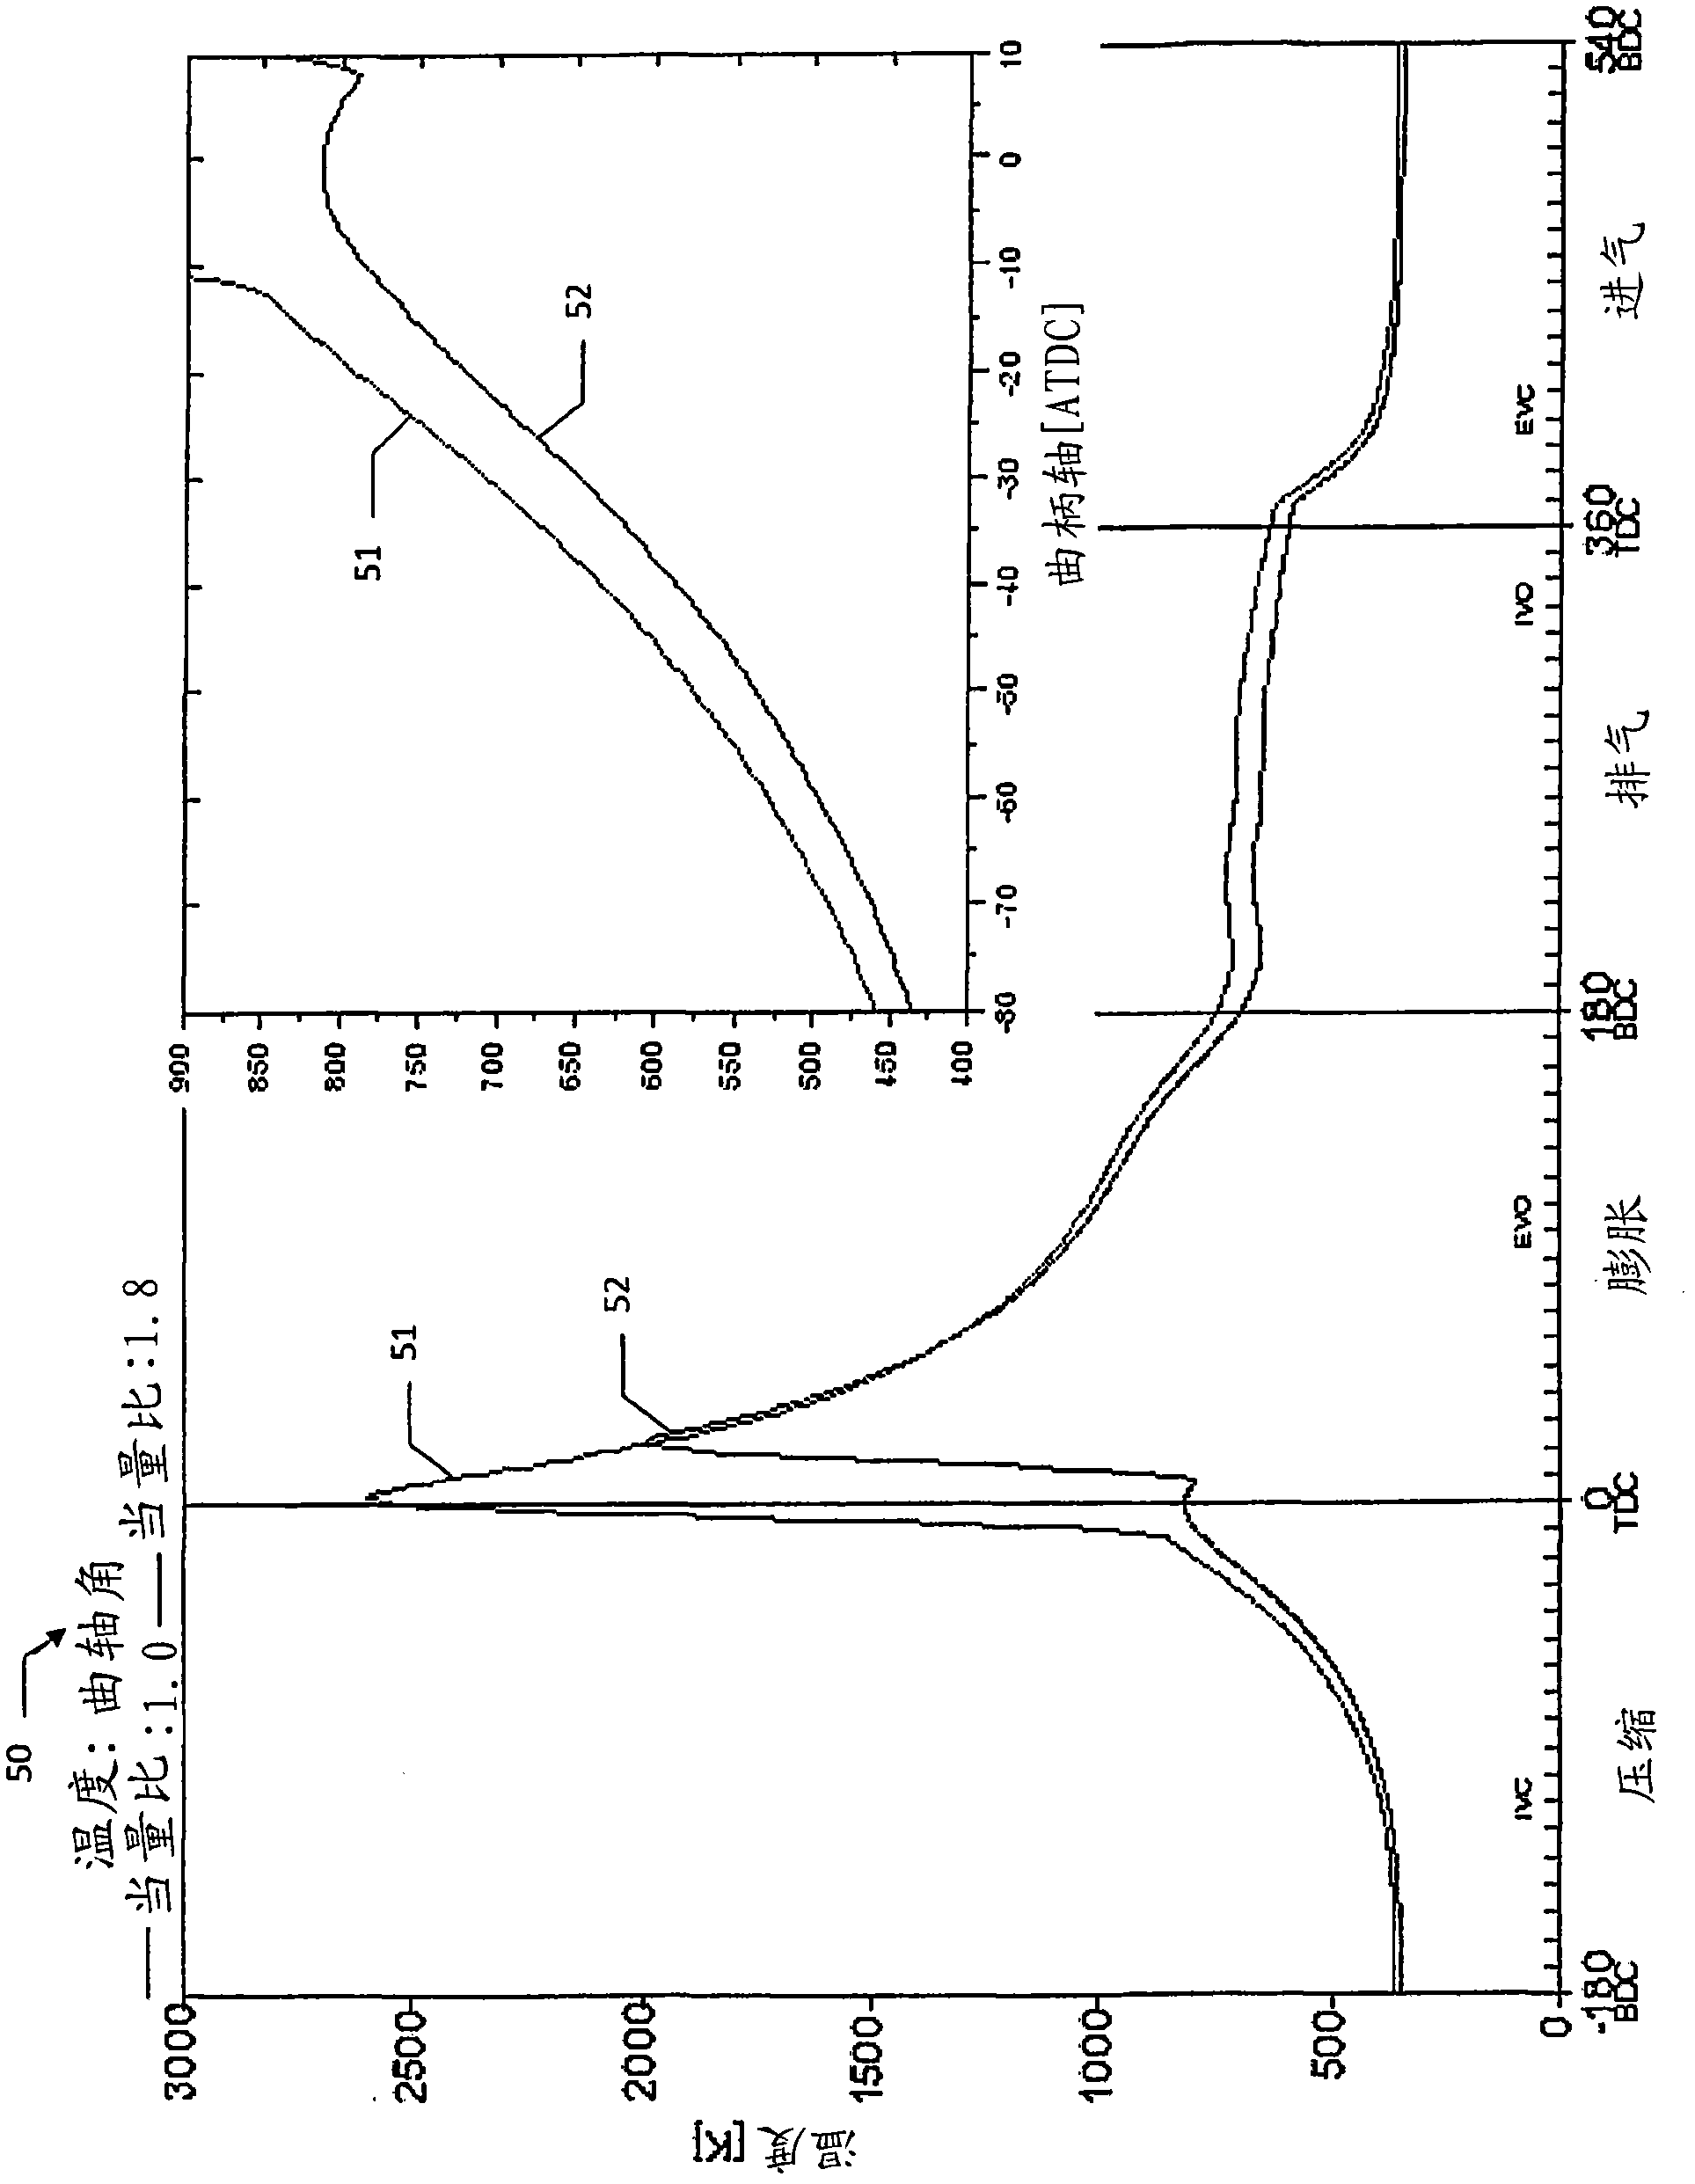 System and method of operating internal combustion engines at fuel rich low-temperature combustion mode as an on-board reformer for solid oxide fuel cell-powered vehicles